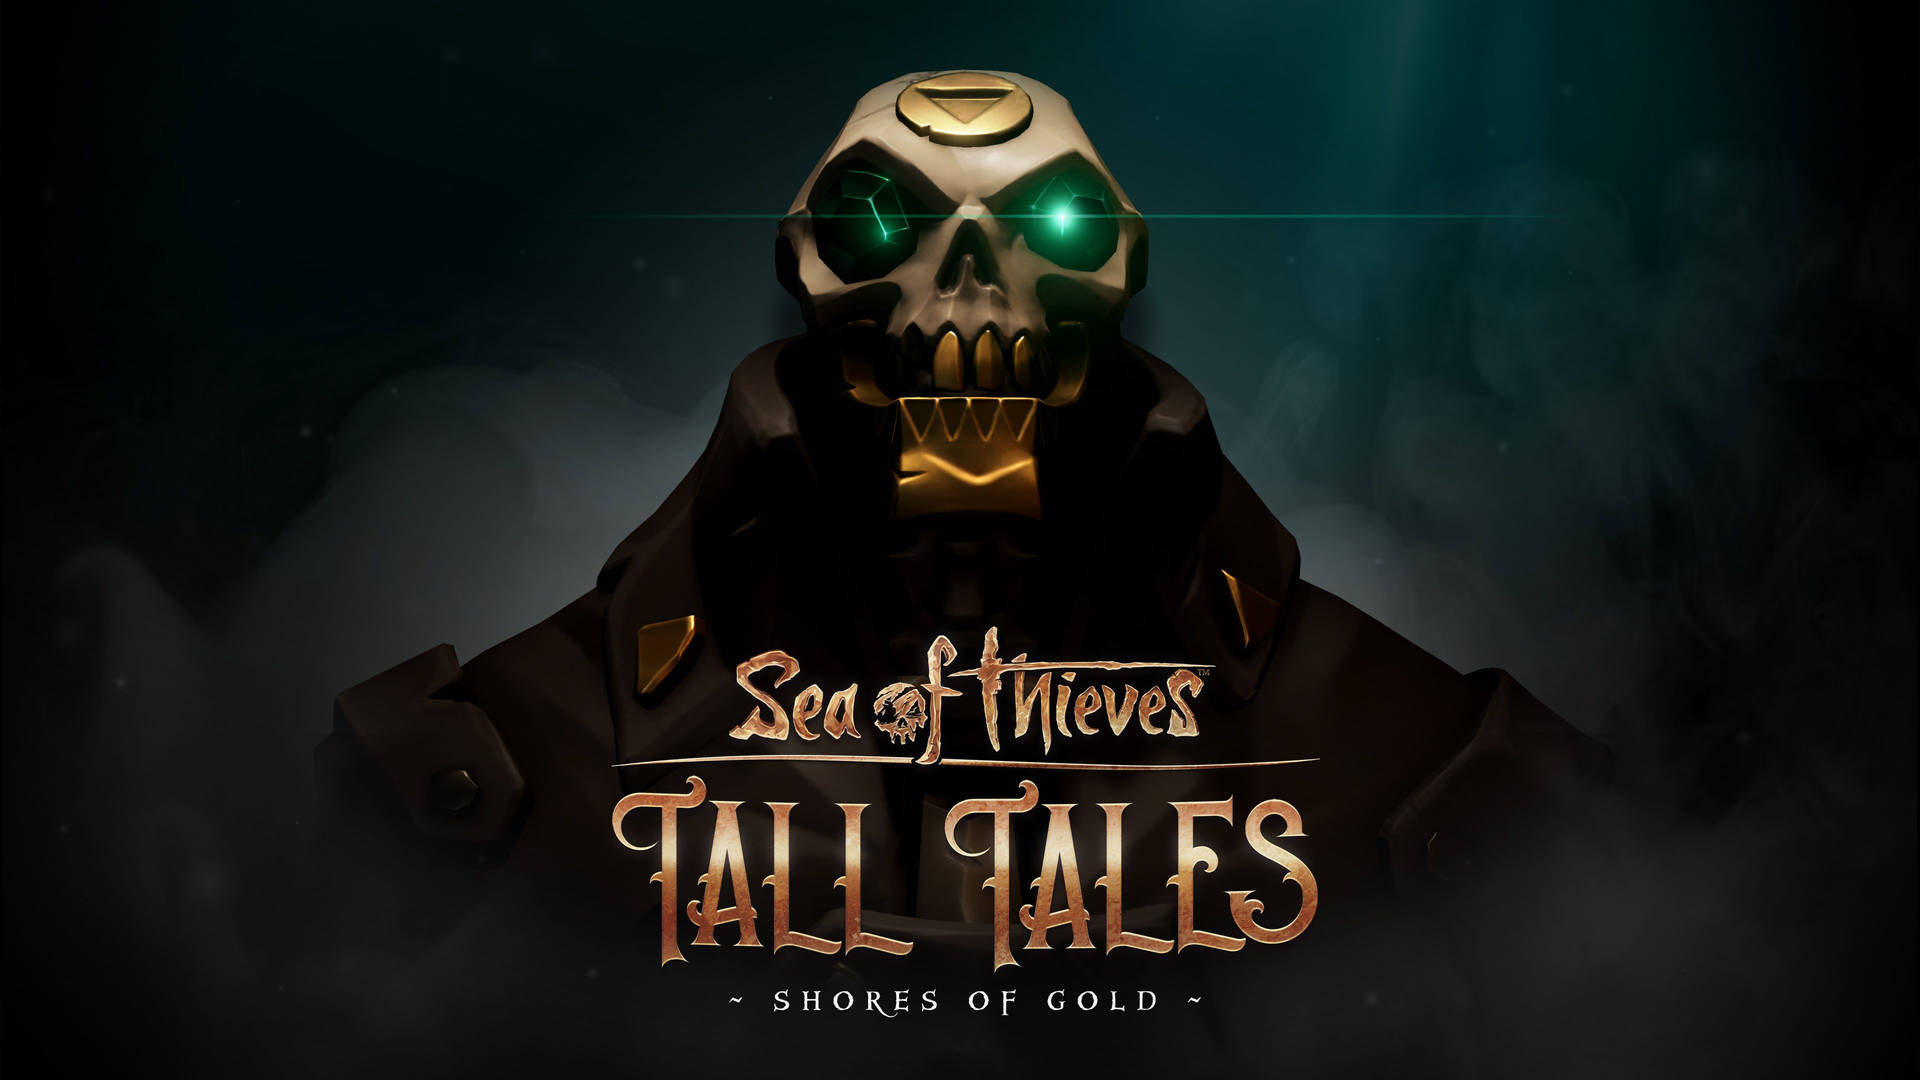 The April 2019 Tall Tales Update expands Sea Of Thieves' vibrant world with exciting new adventures Wallpaper